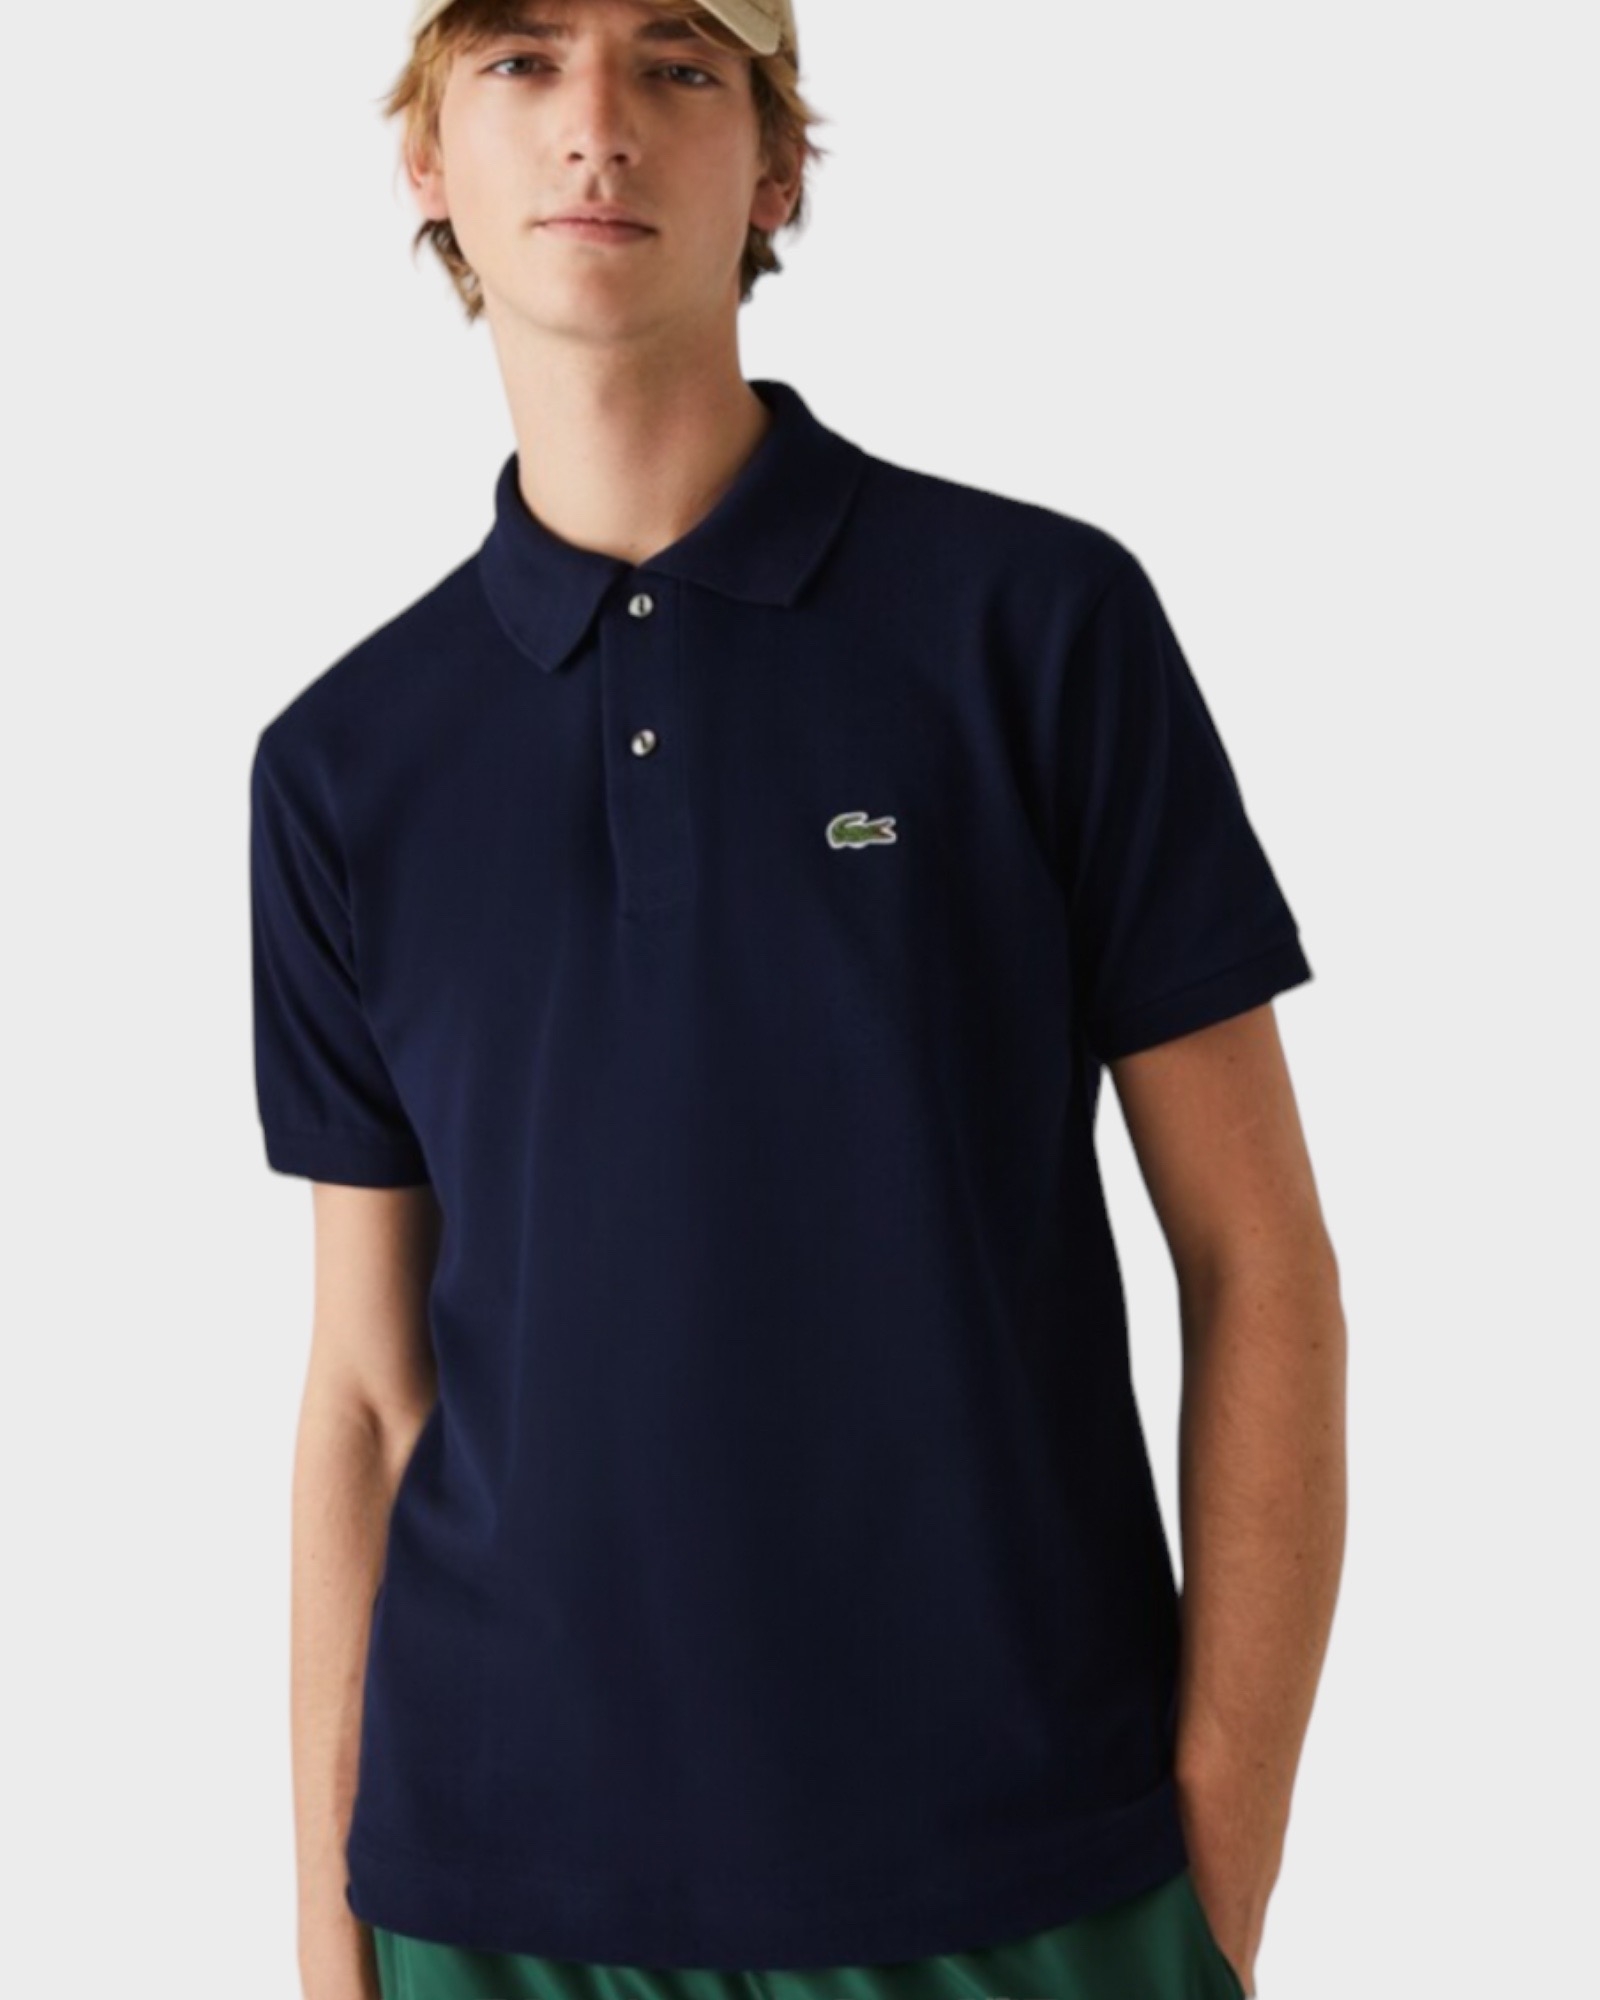 Lacoste polo - Navy | 850 | Lacoste | Rungsted Havn